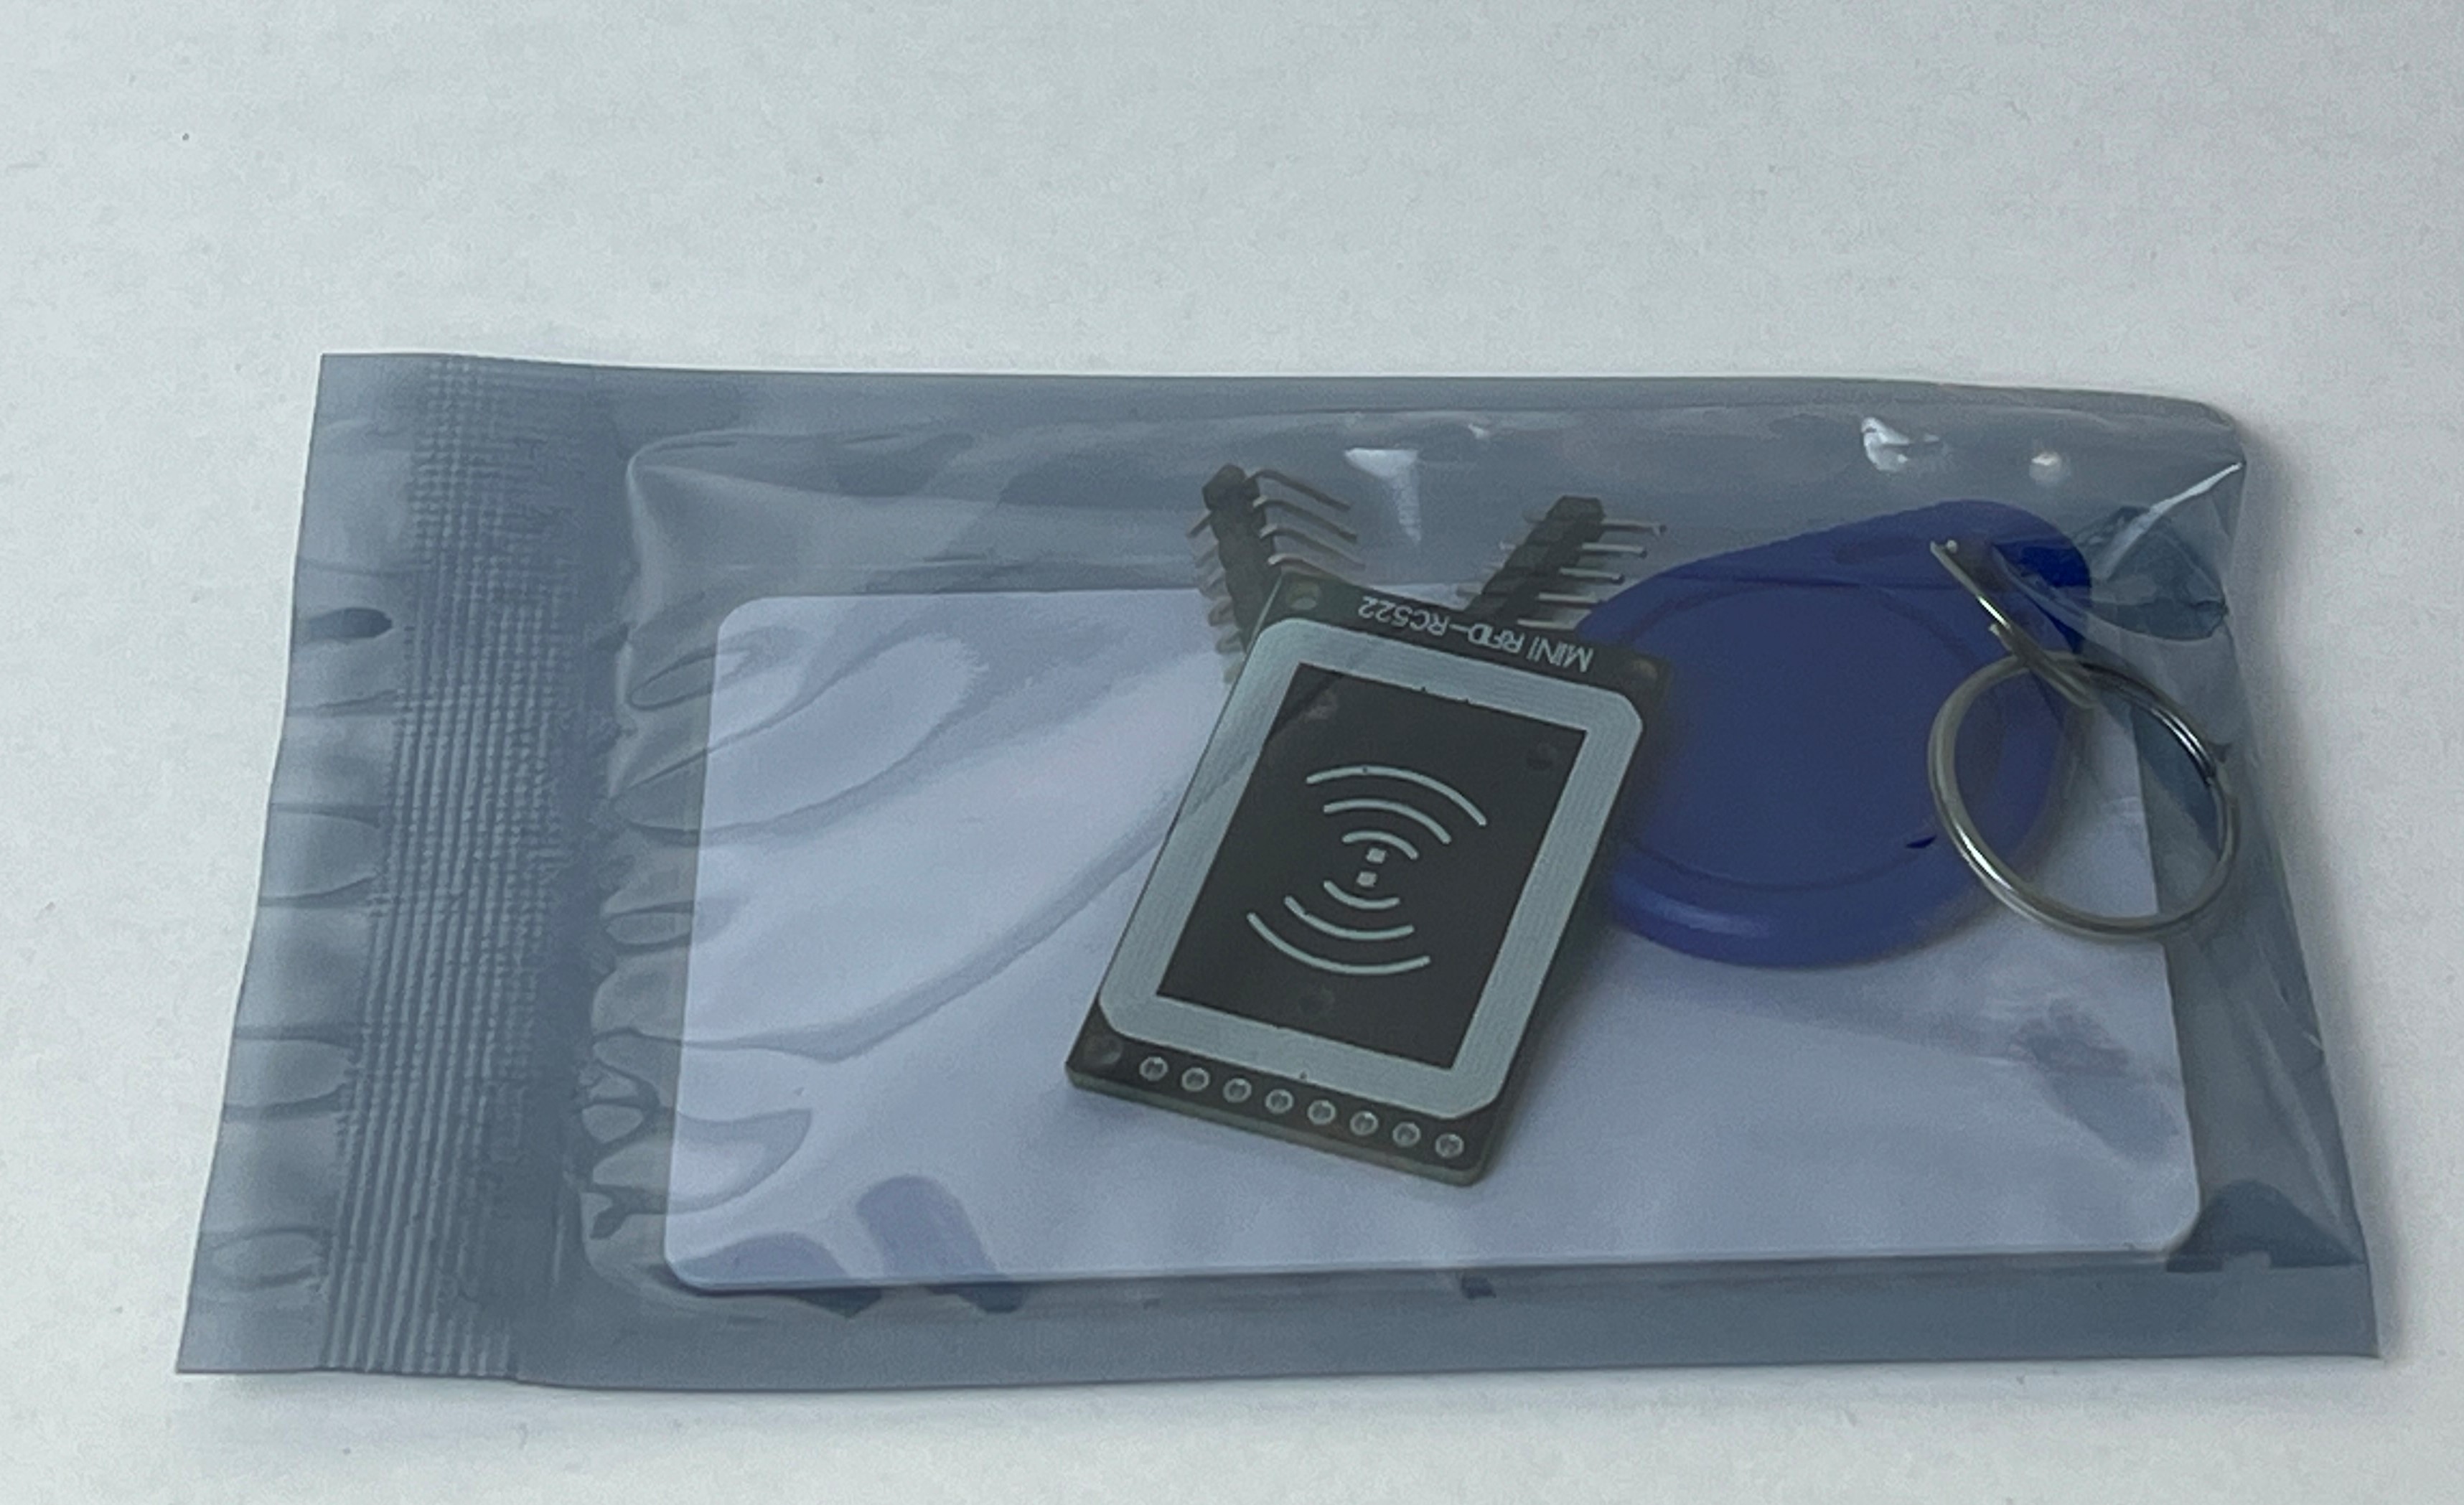 Picture of the RFID kit